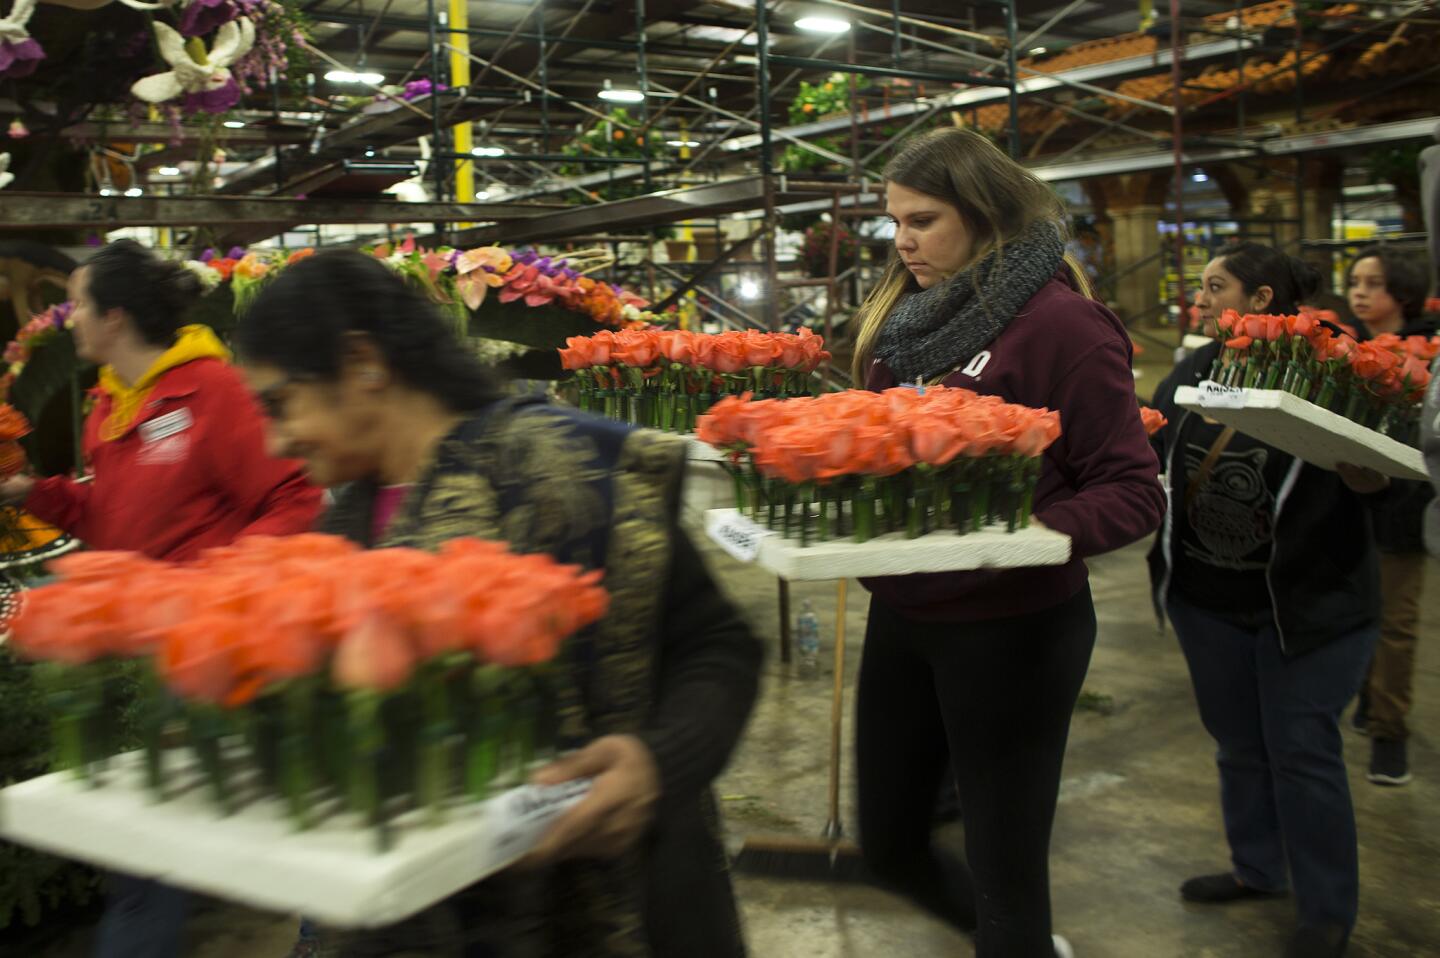 Workers carry fresh flowers to finish floats for the Rose Parade in a warehouse in Irwindale, Calif.